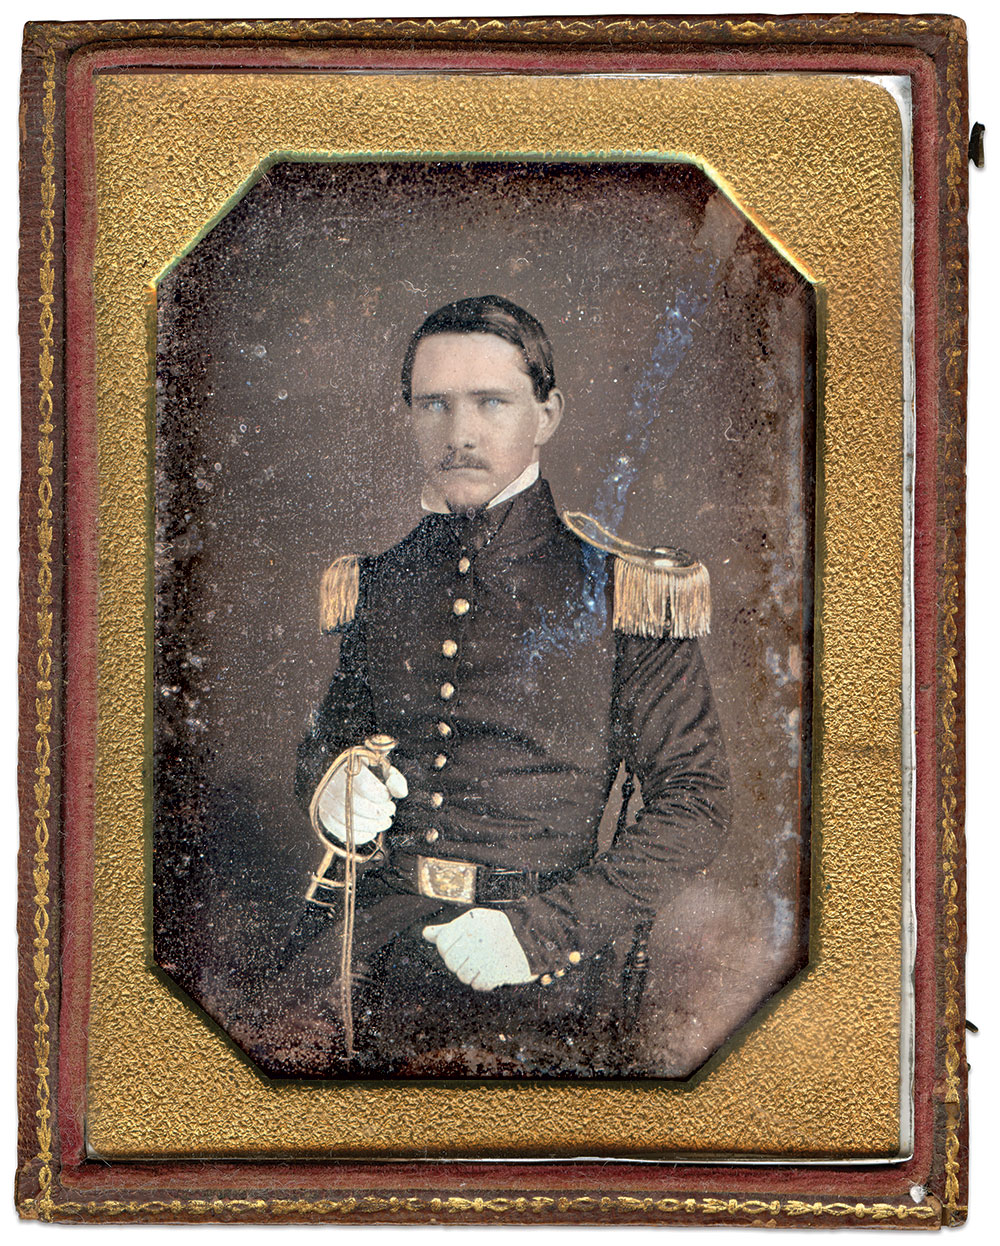 Quarter-plate daguerreotype by an anonymous photographer.